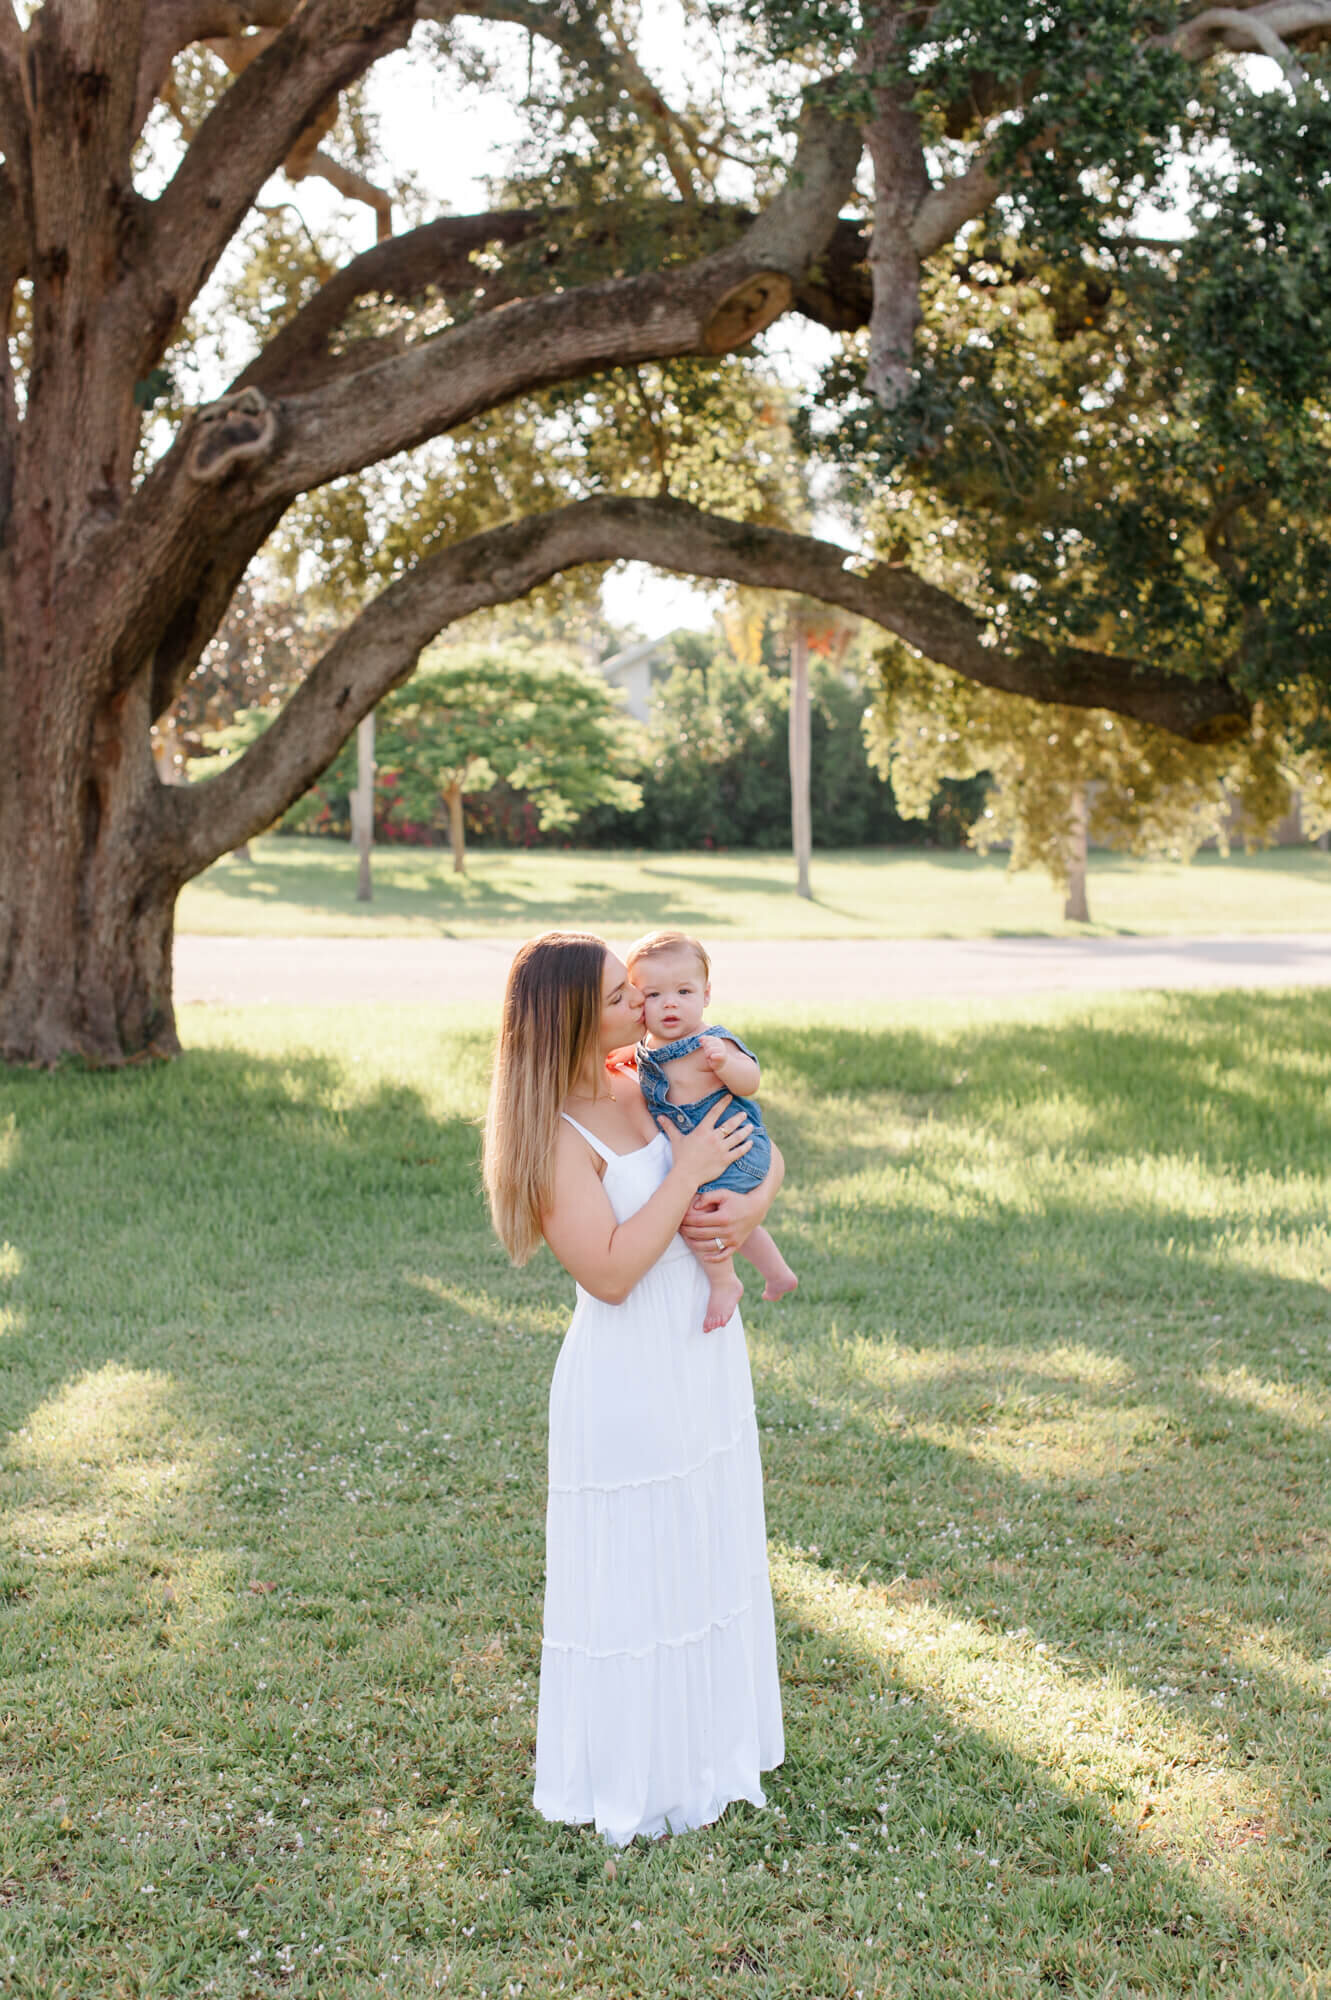 Mom kissing her sweet son on the cheek underneath an old oak tree